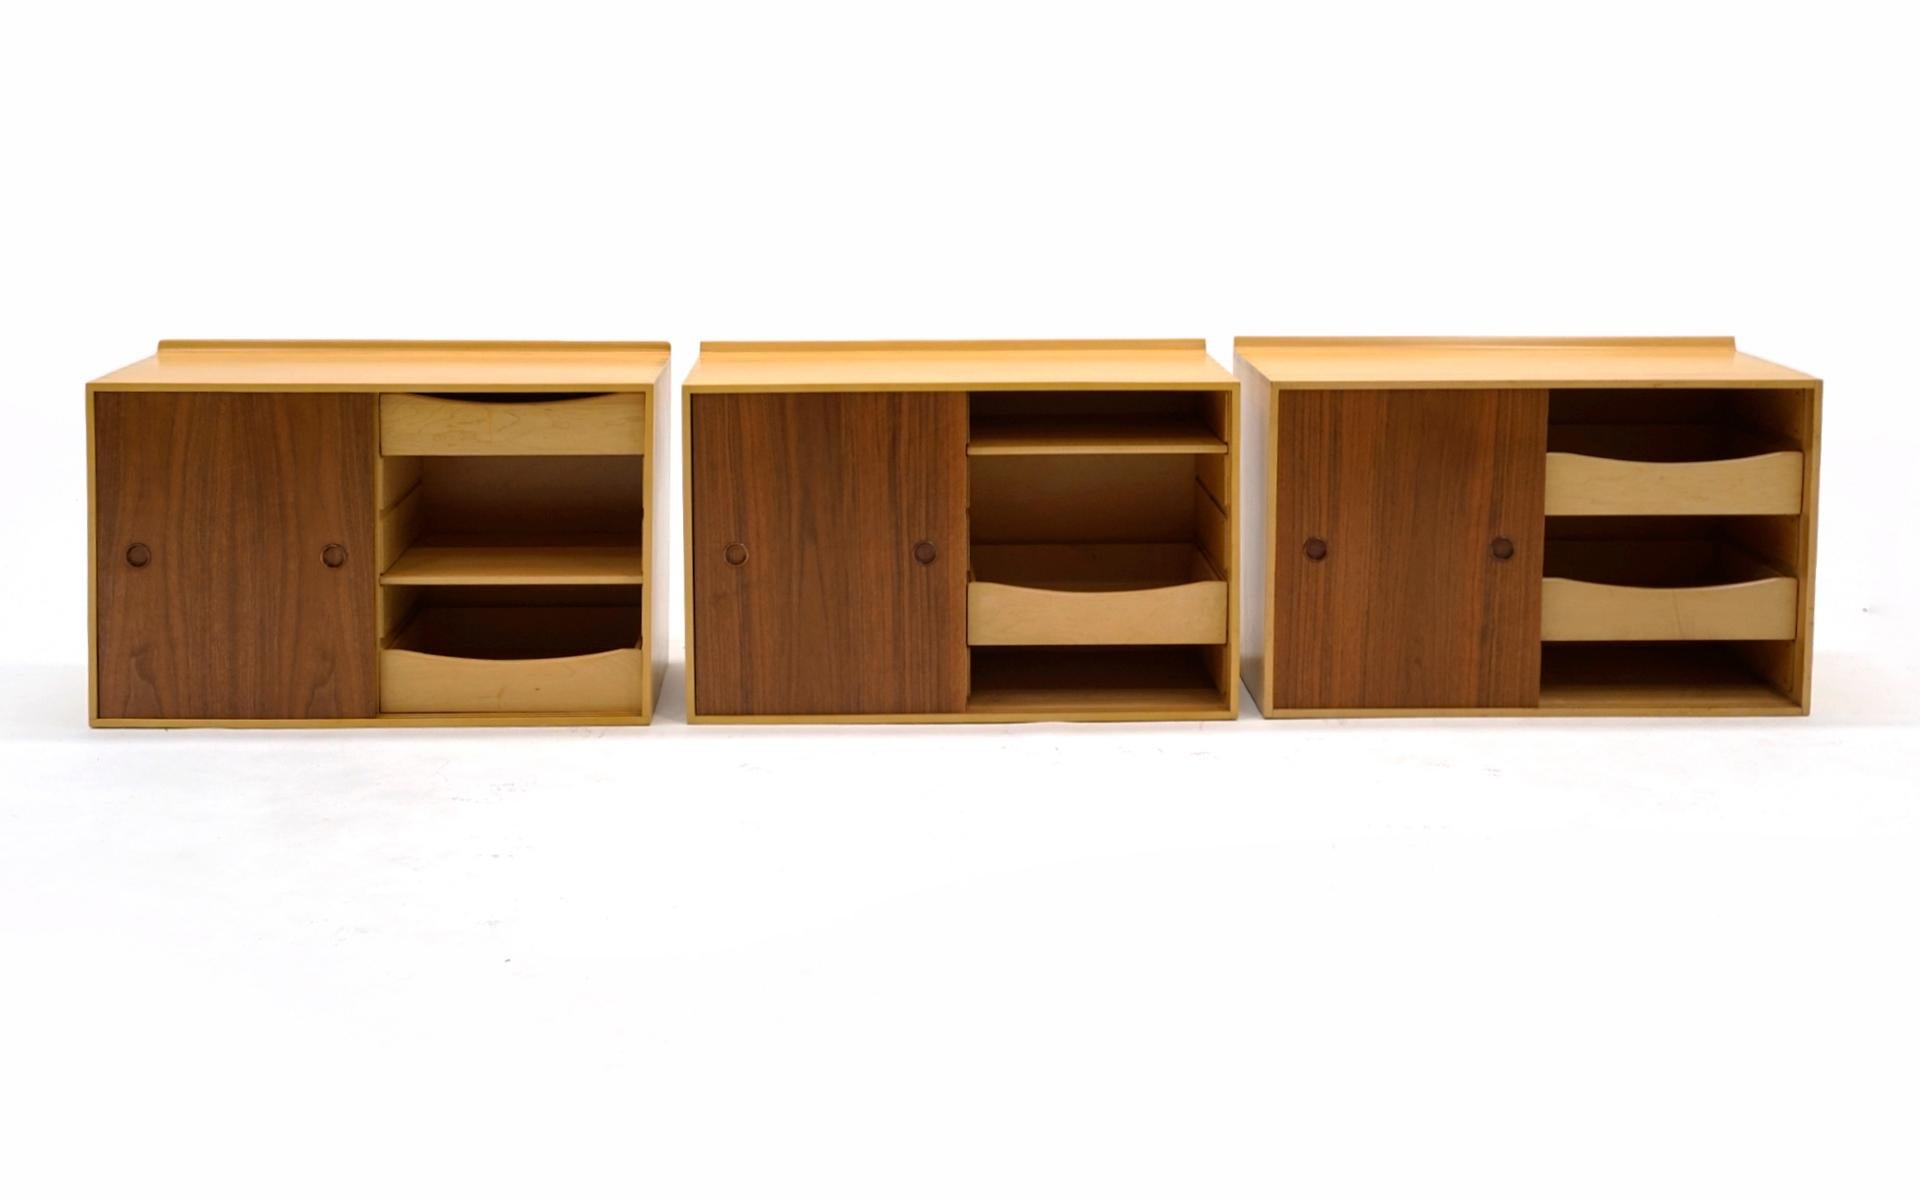 Mid-Century Modern Wall Mounted Cabinets by Finn Juhl for Baker, Walnut and Birch, Great Condition For Sale